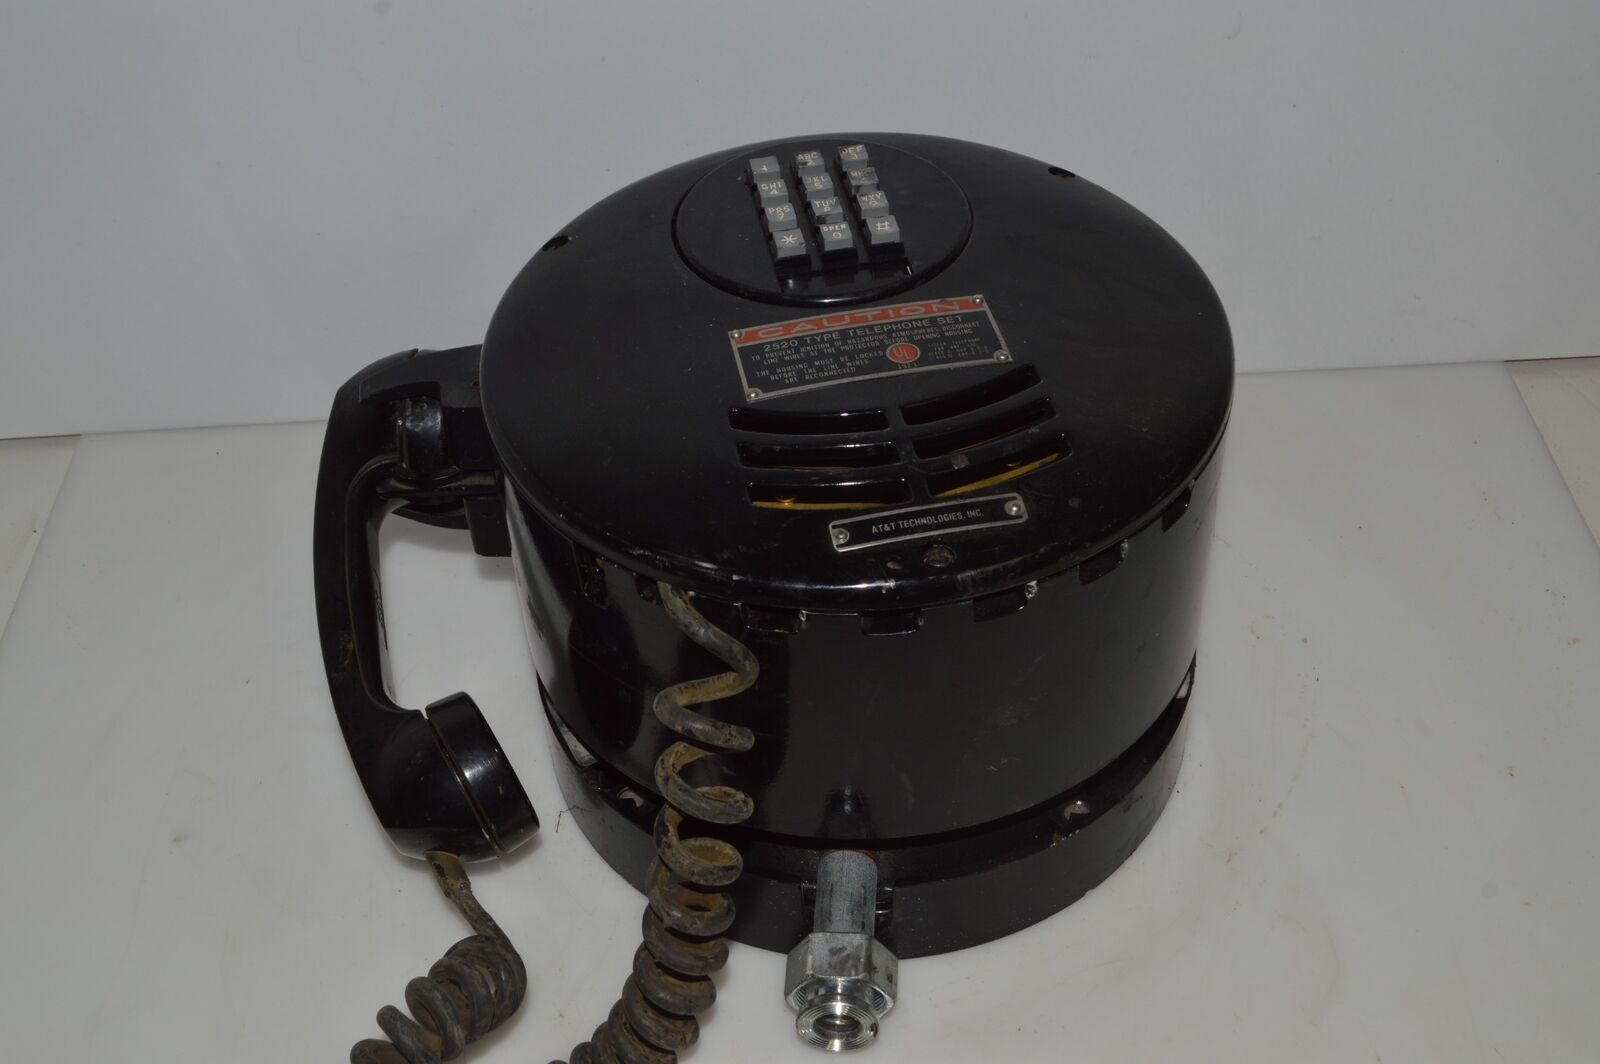 AT&T WESTERN ELECTRIC  EXPLOSION PROOF TELEPHONE 2520 PHONE INDUSTRIAL  (QOR91)